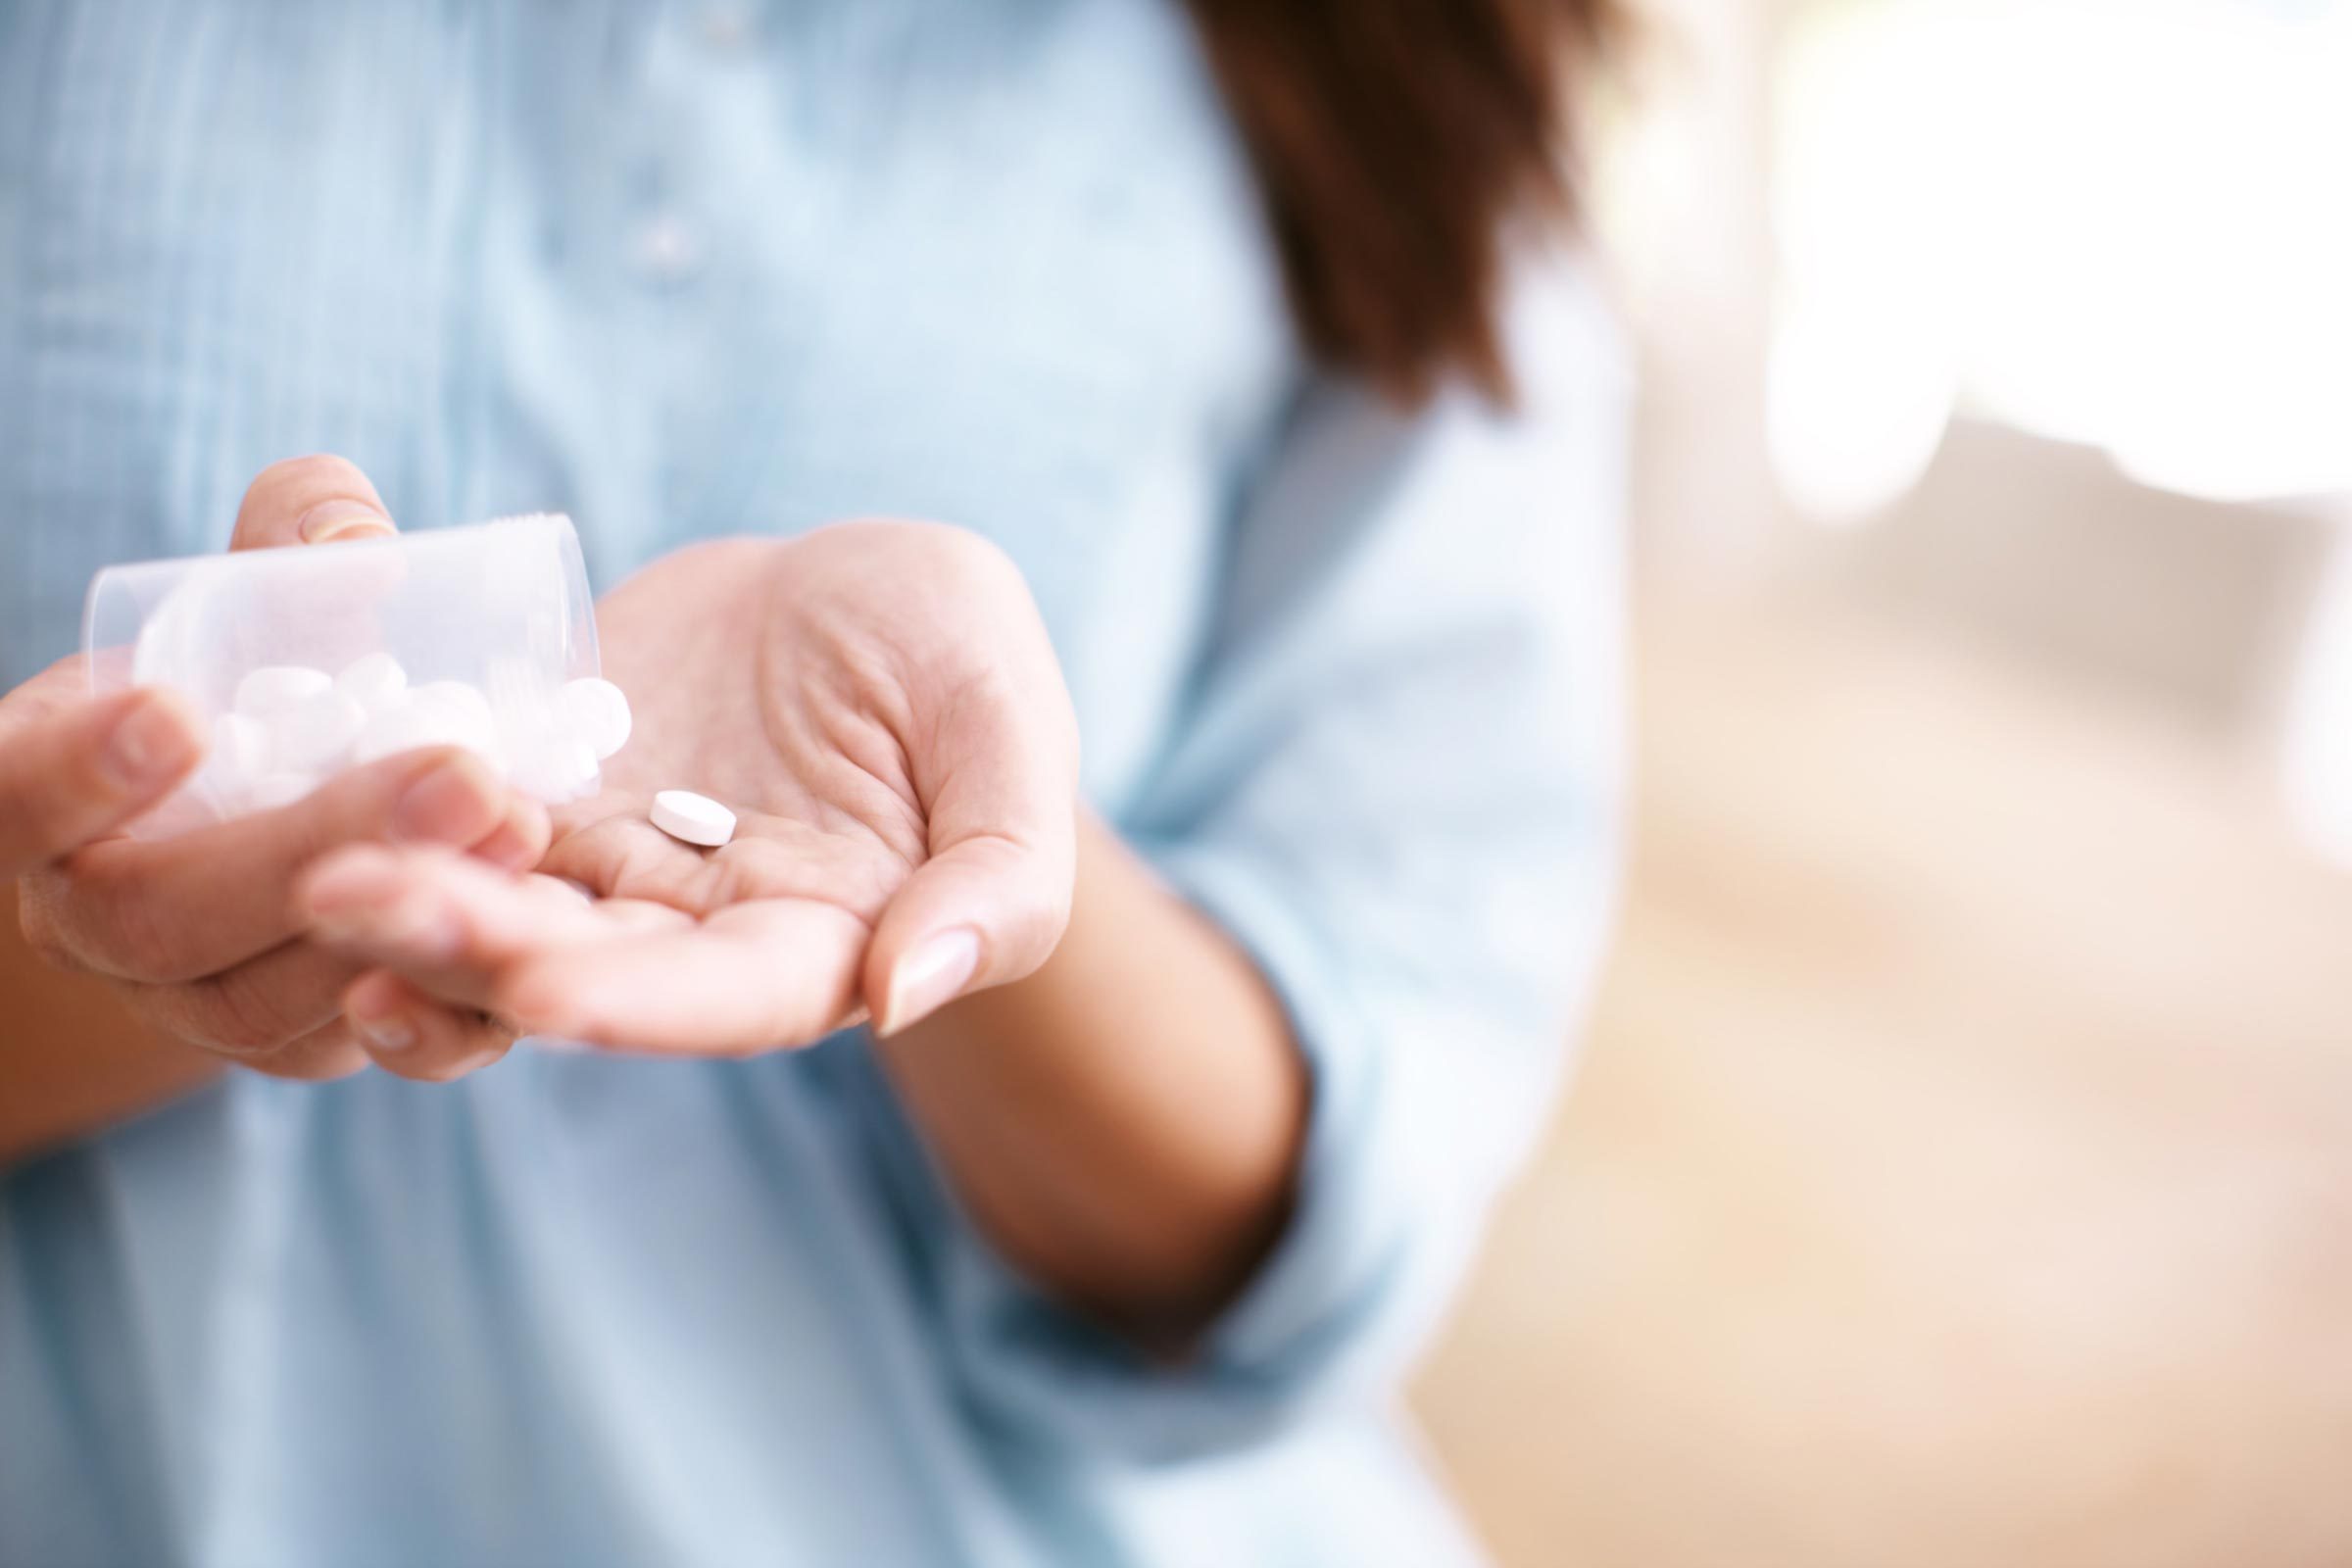 The Danger of Swallowing Pills Without Water—It's Not Choking